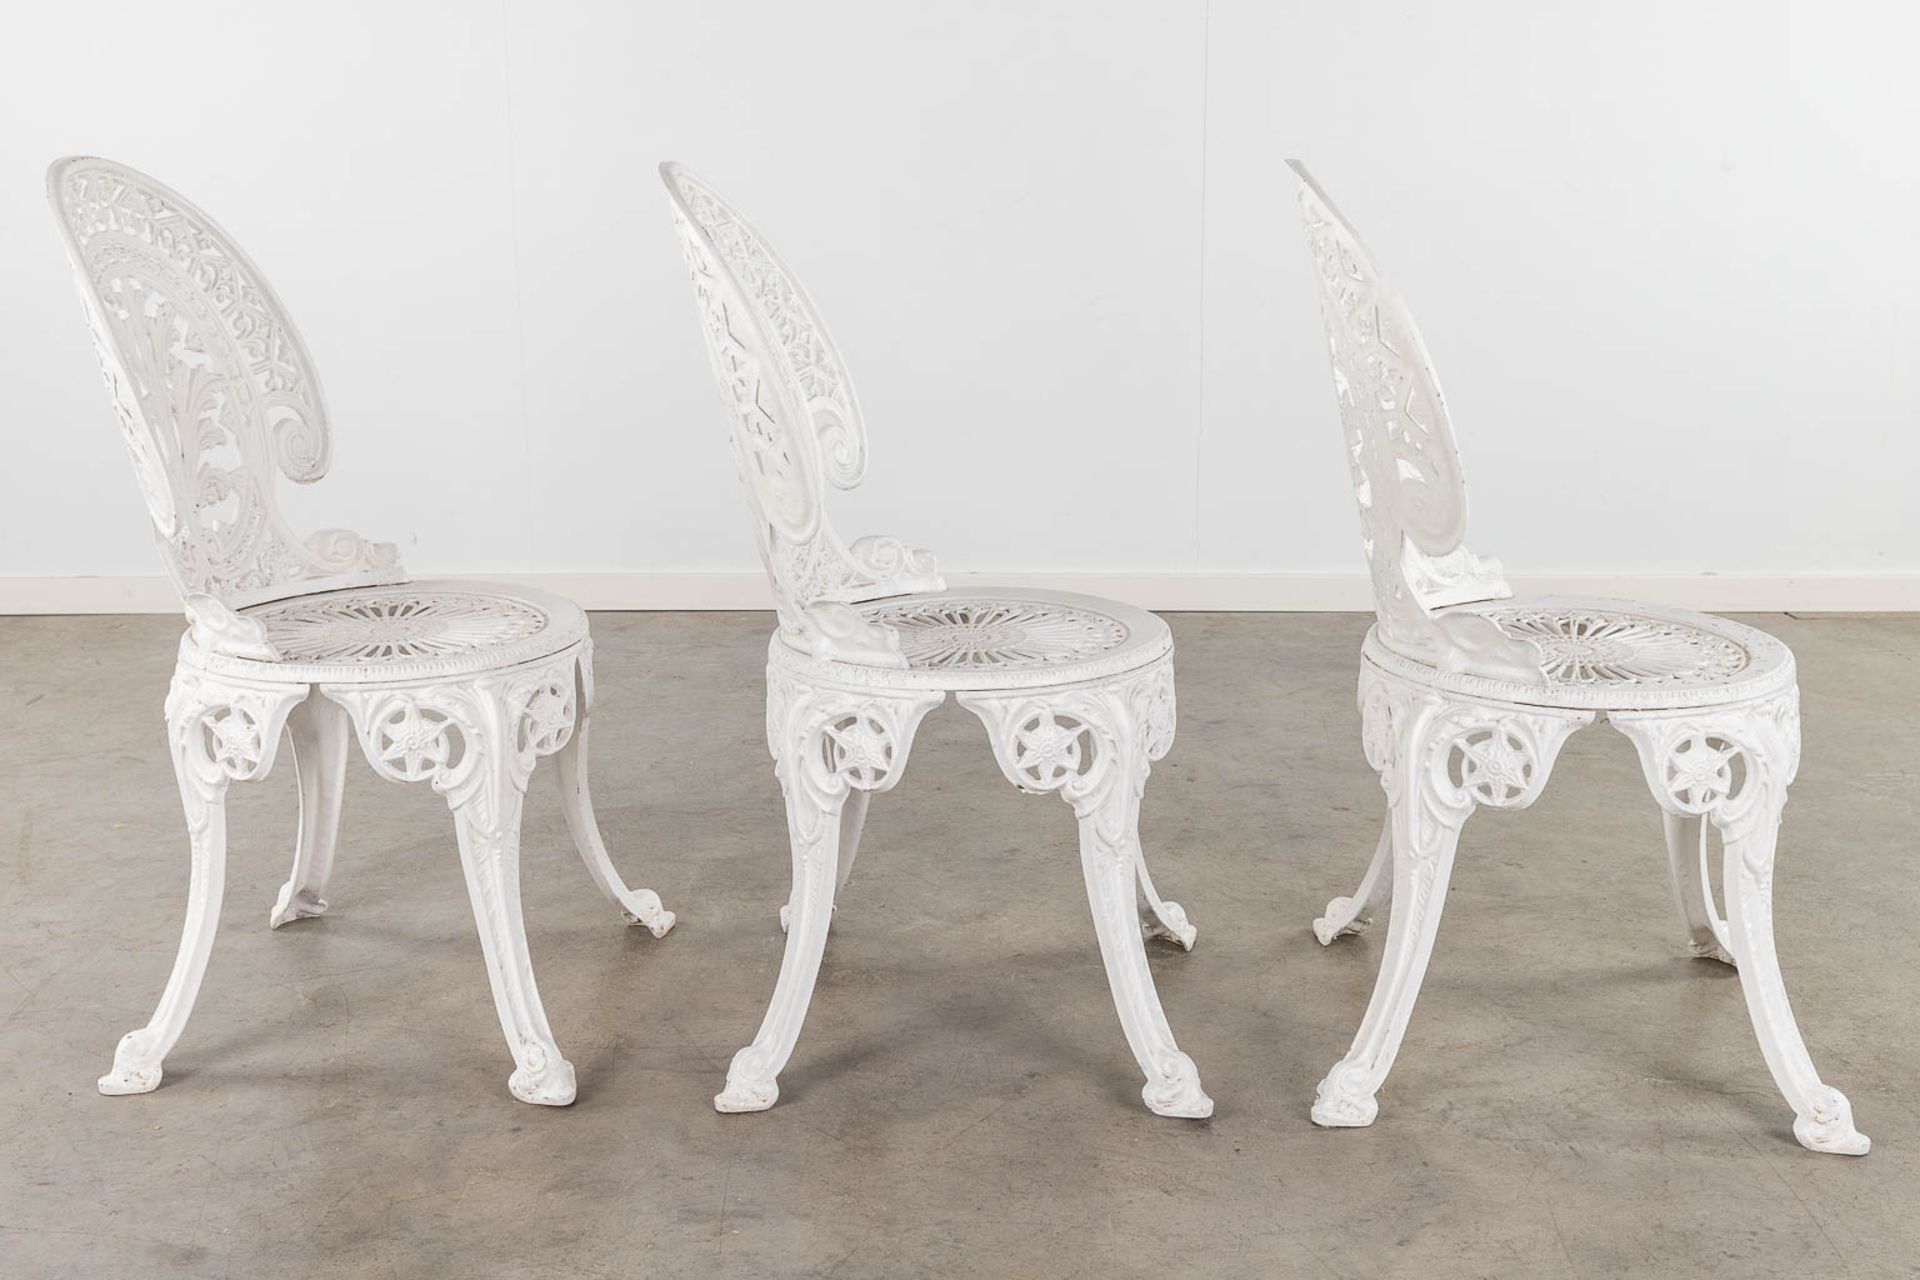 A garden set, consisting of a table and 3 chairs, white patinated aluminium. (H: 65 x D: 70 cm) - Bild 4 aus 17